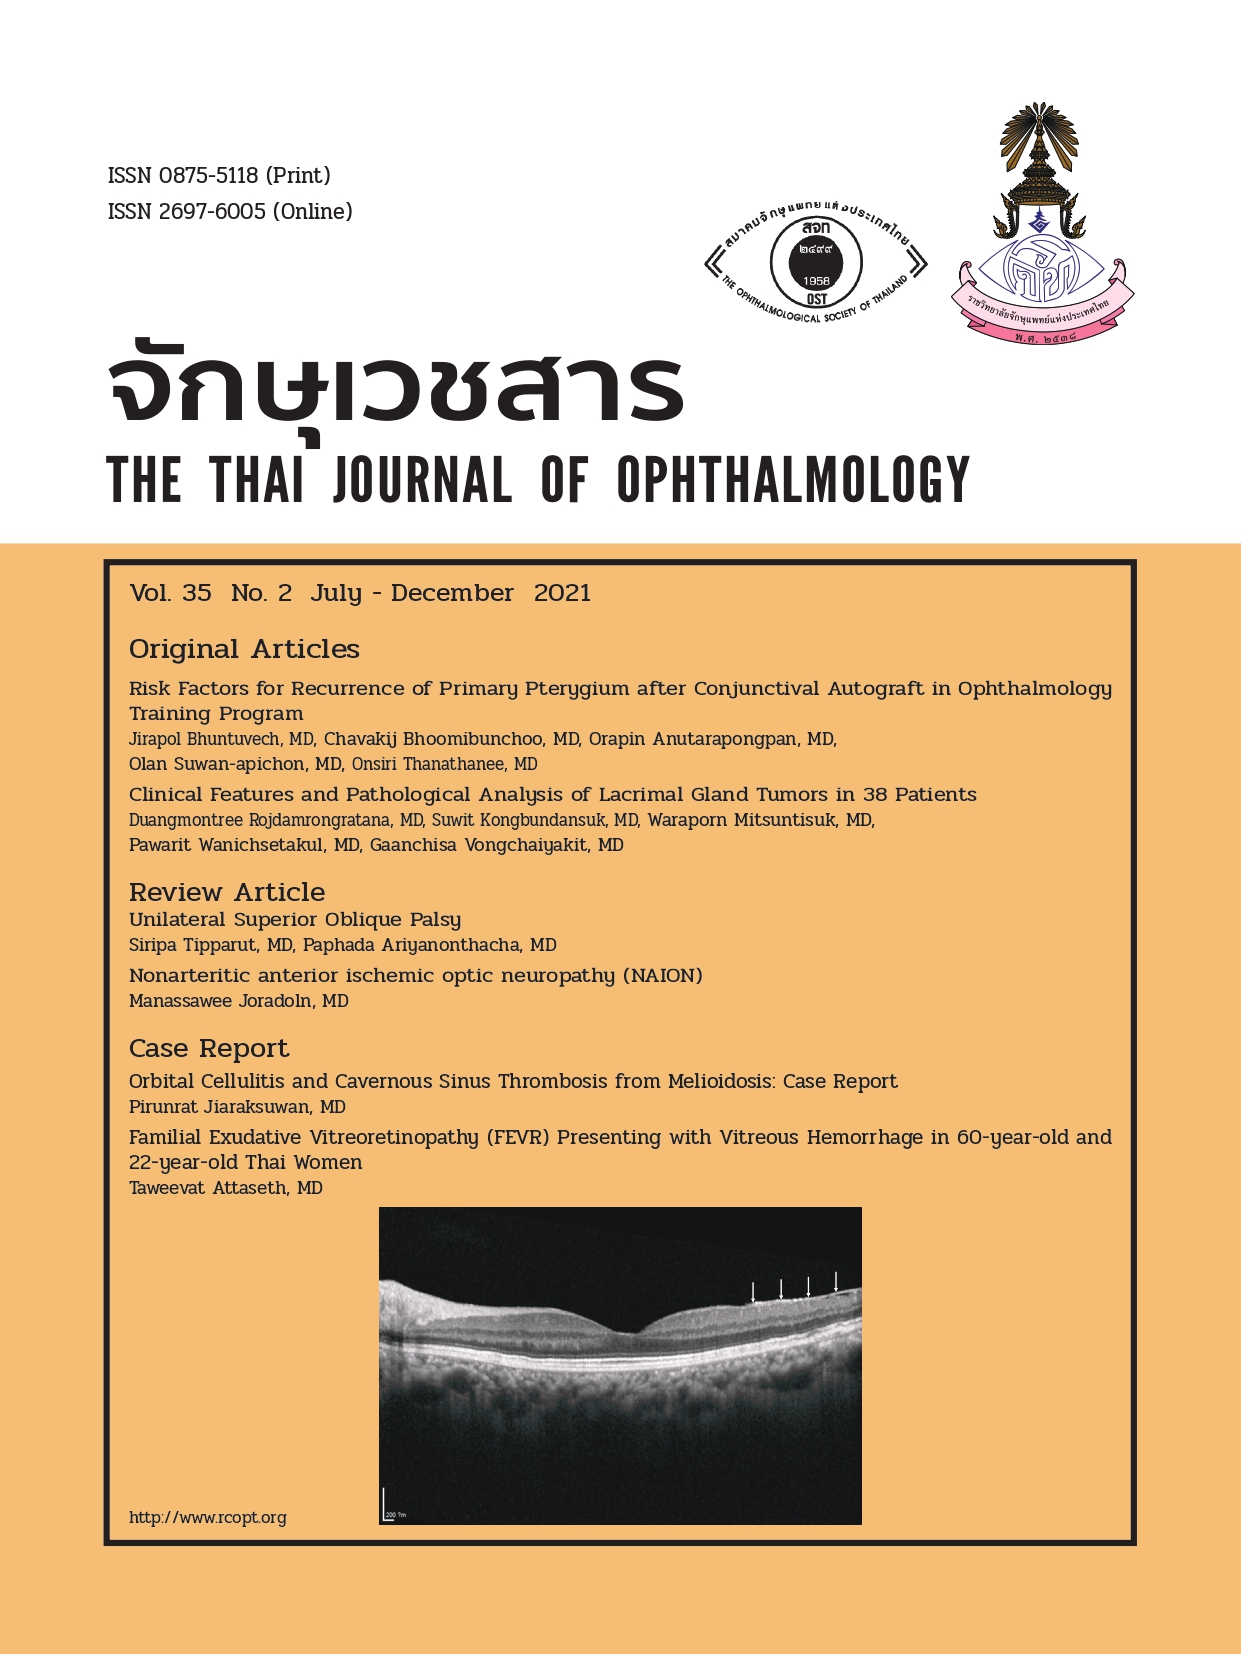 1955Cover J Ophthalmol-35-2-64Final-6_page-0001.jpg